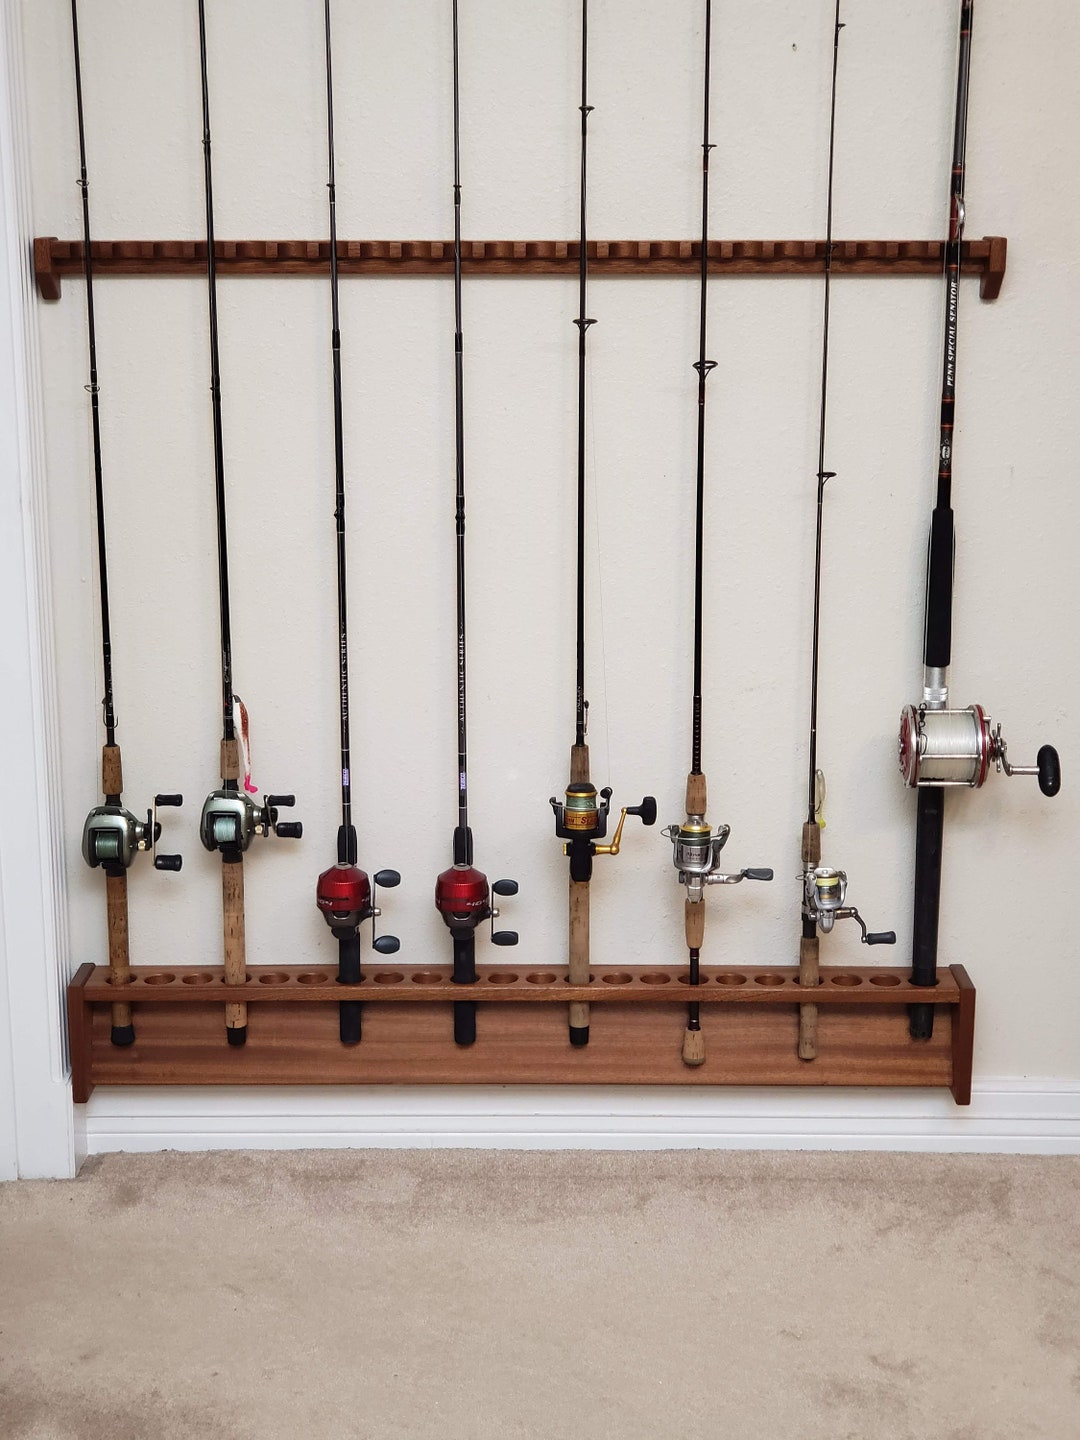 Solid Mahogany Rod Rack, 46 Inch Wall Mounted Built in Fishing Pole Holder,  Real Estate Closing Gift for Fisherman Outdoorsman Hunting Cabin 